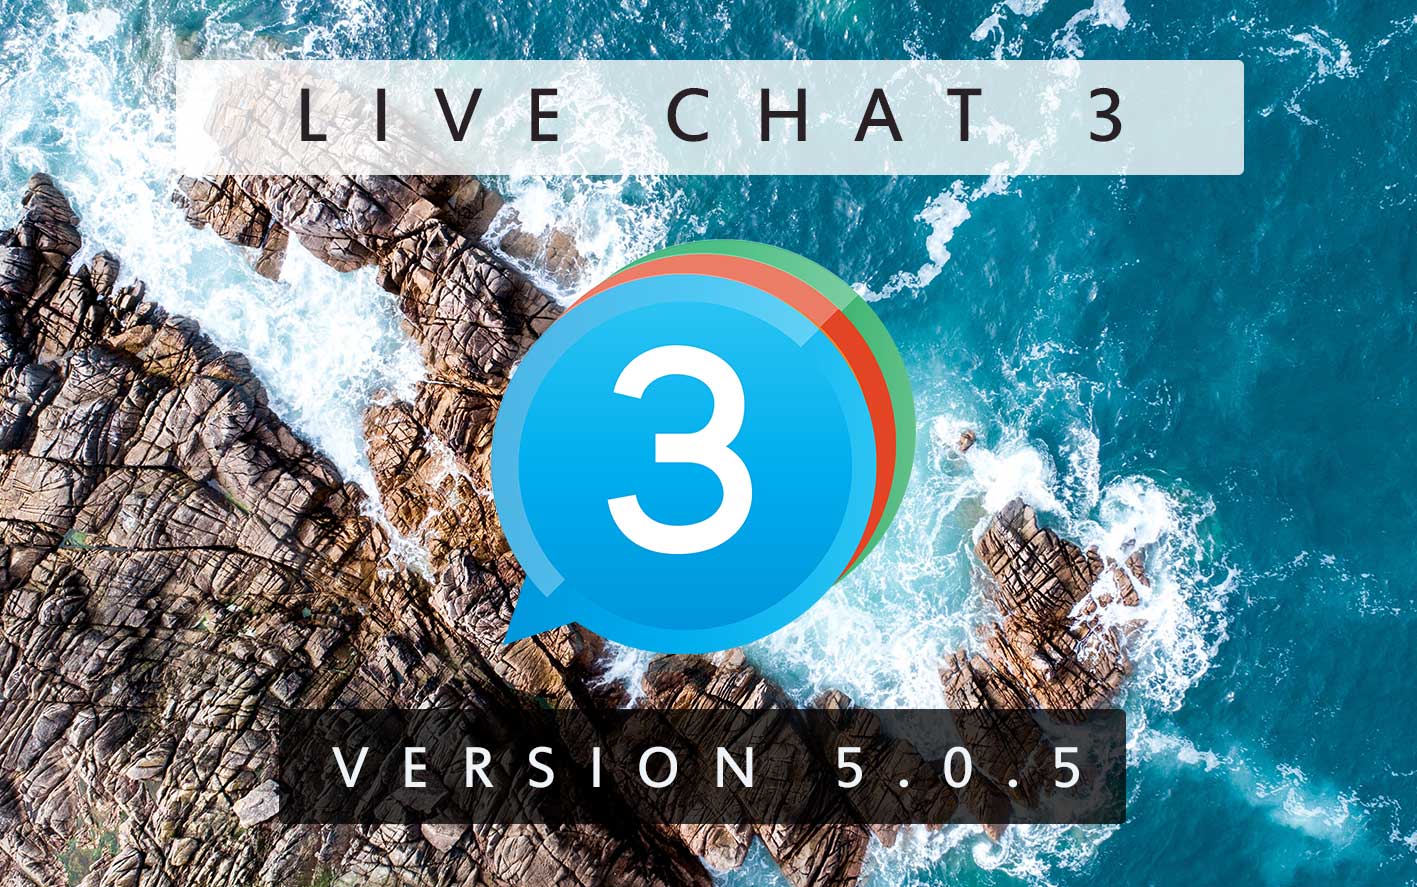 Live Chat 3 - Version 5.0.5